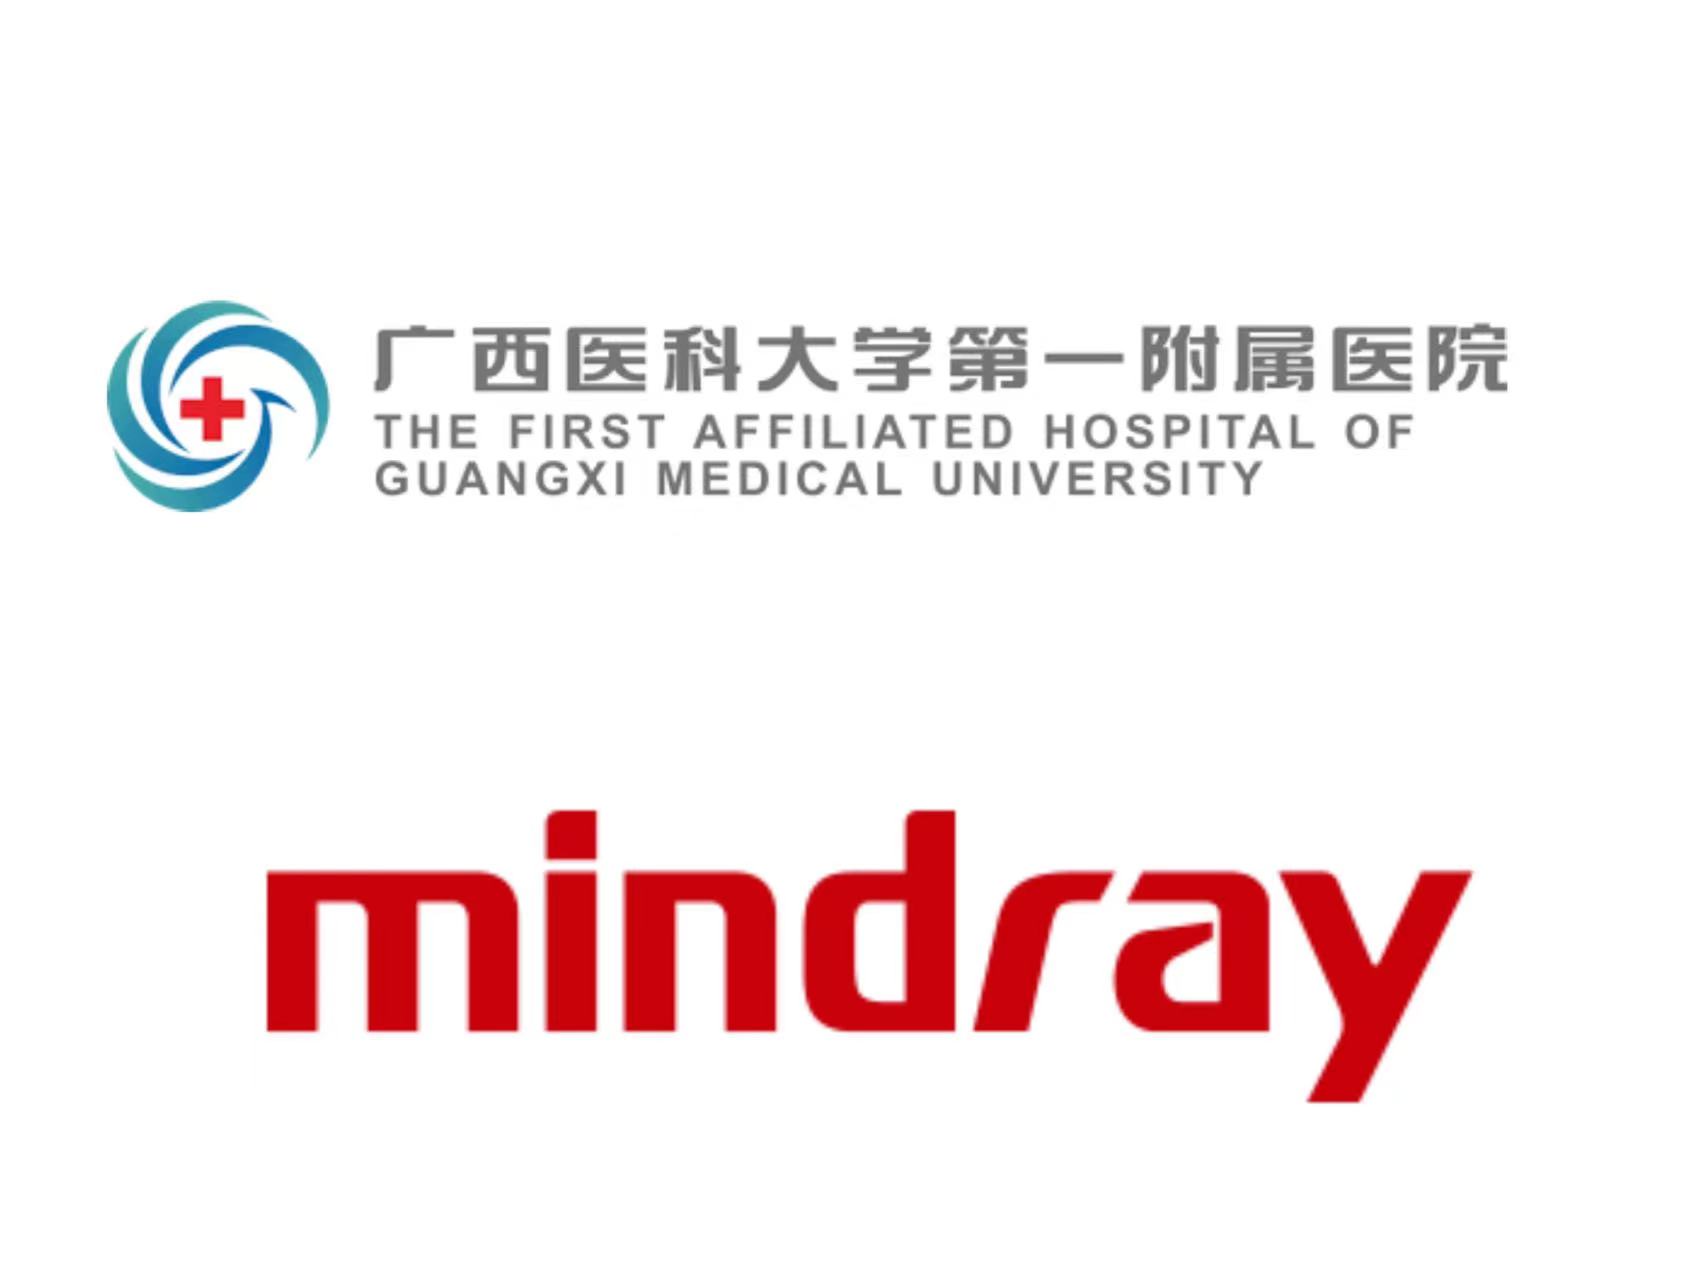 Mindray and The First Affiliated Hospital of Guangxi Medical University signed a strategic cooperation agreement